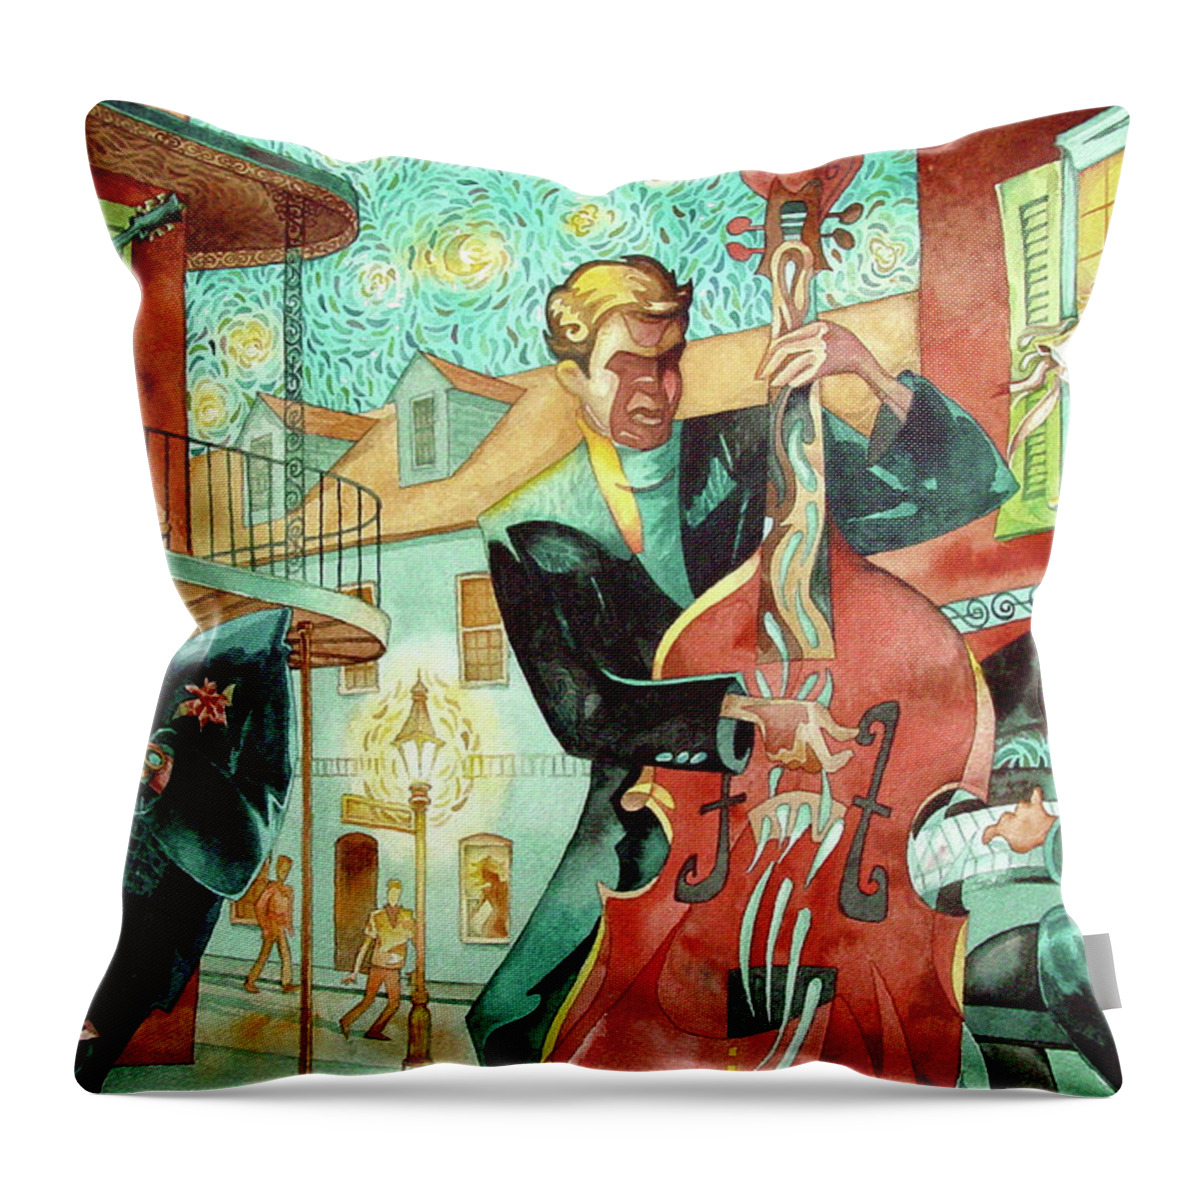 Watercolor Throw Pillow featuring the painting Shine On by Mick Williams